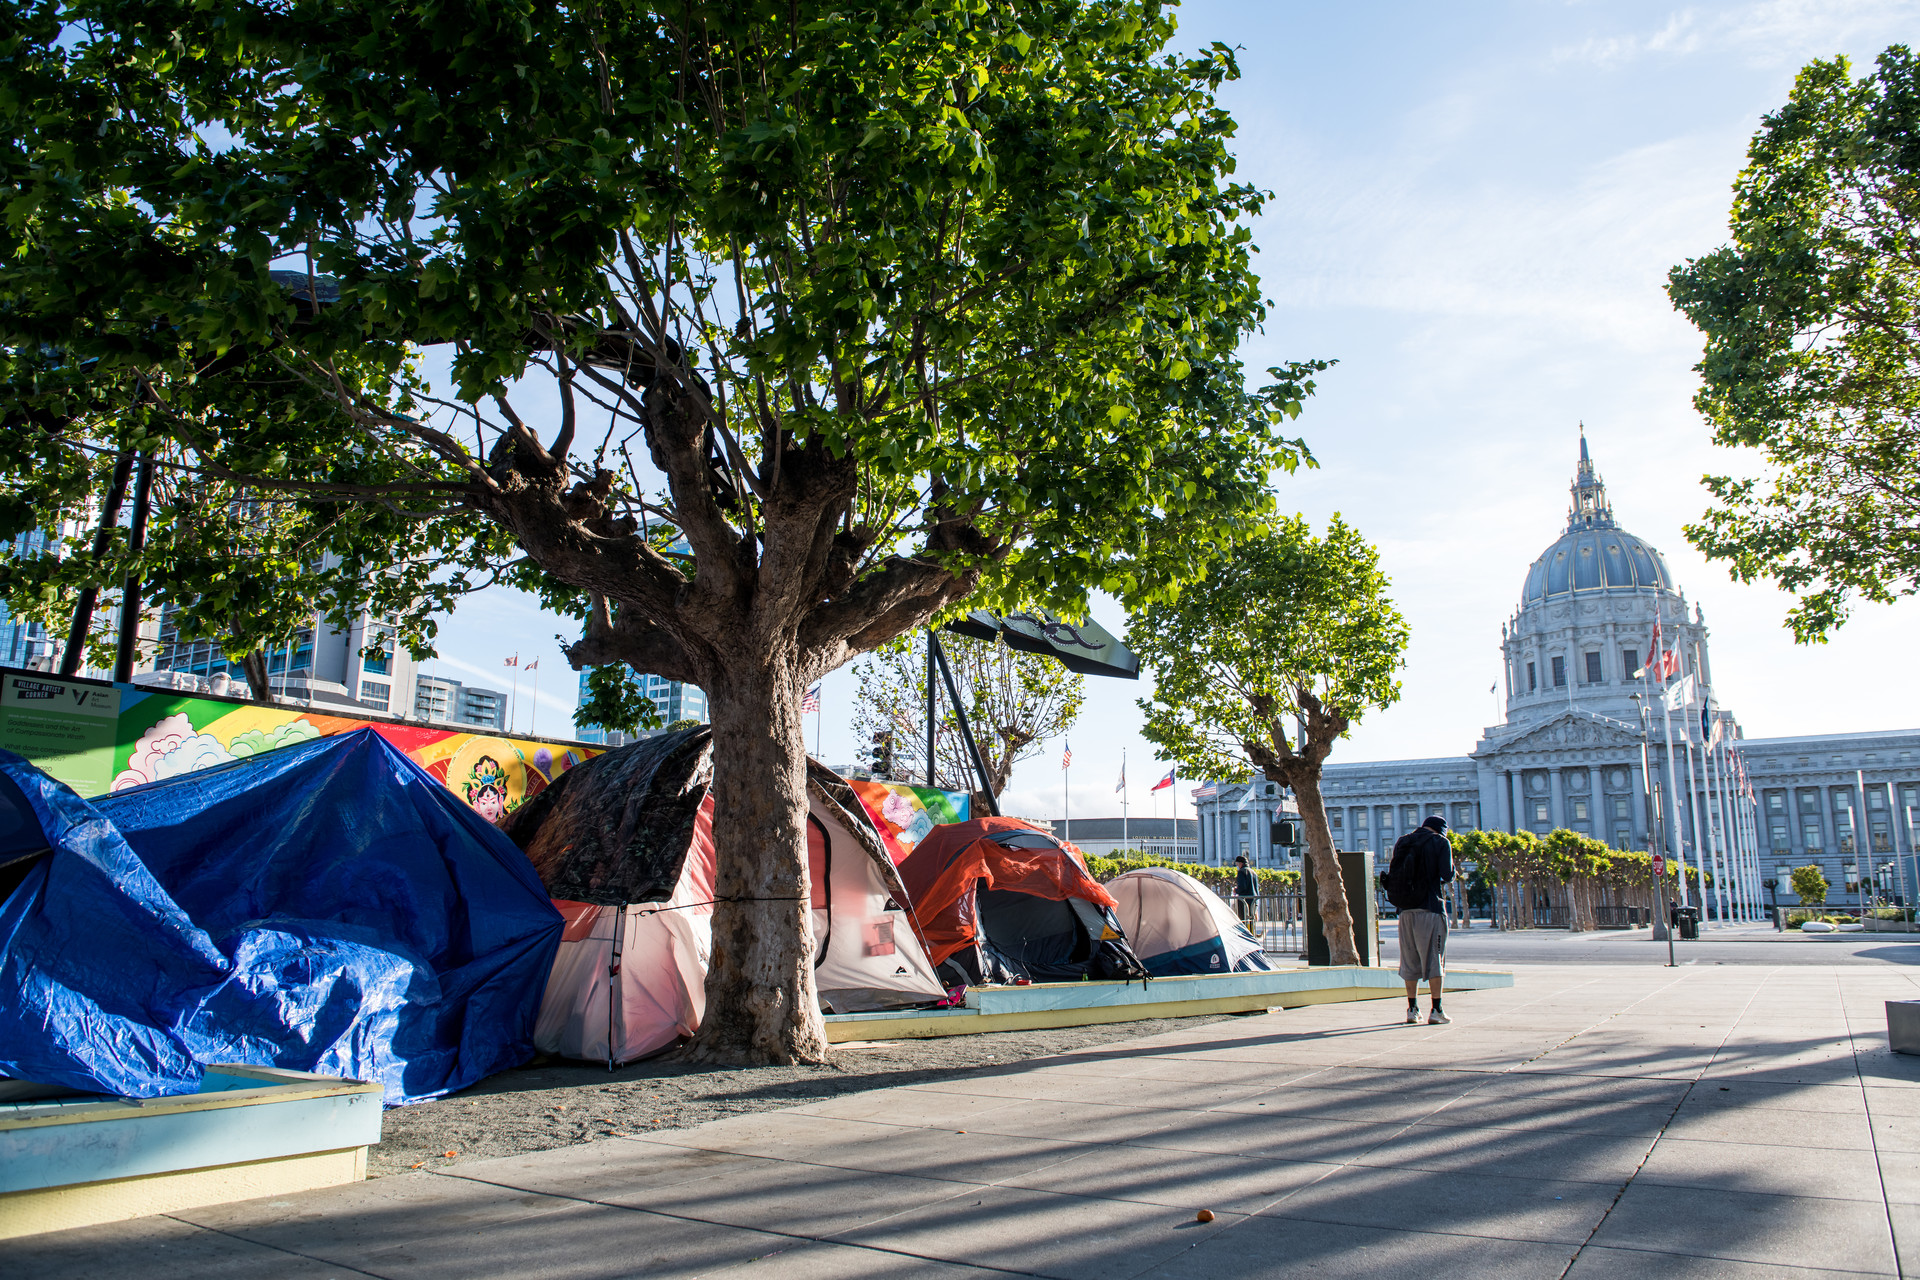 Tents line a gravel sidewalk off Fulton Street near City Hall on May 5, 2020. On Wednesday, city staffers started drawing out socially distant spaces with chalk on the street for the tents to stay.